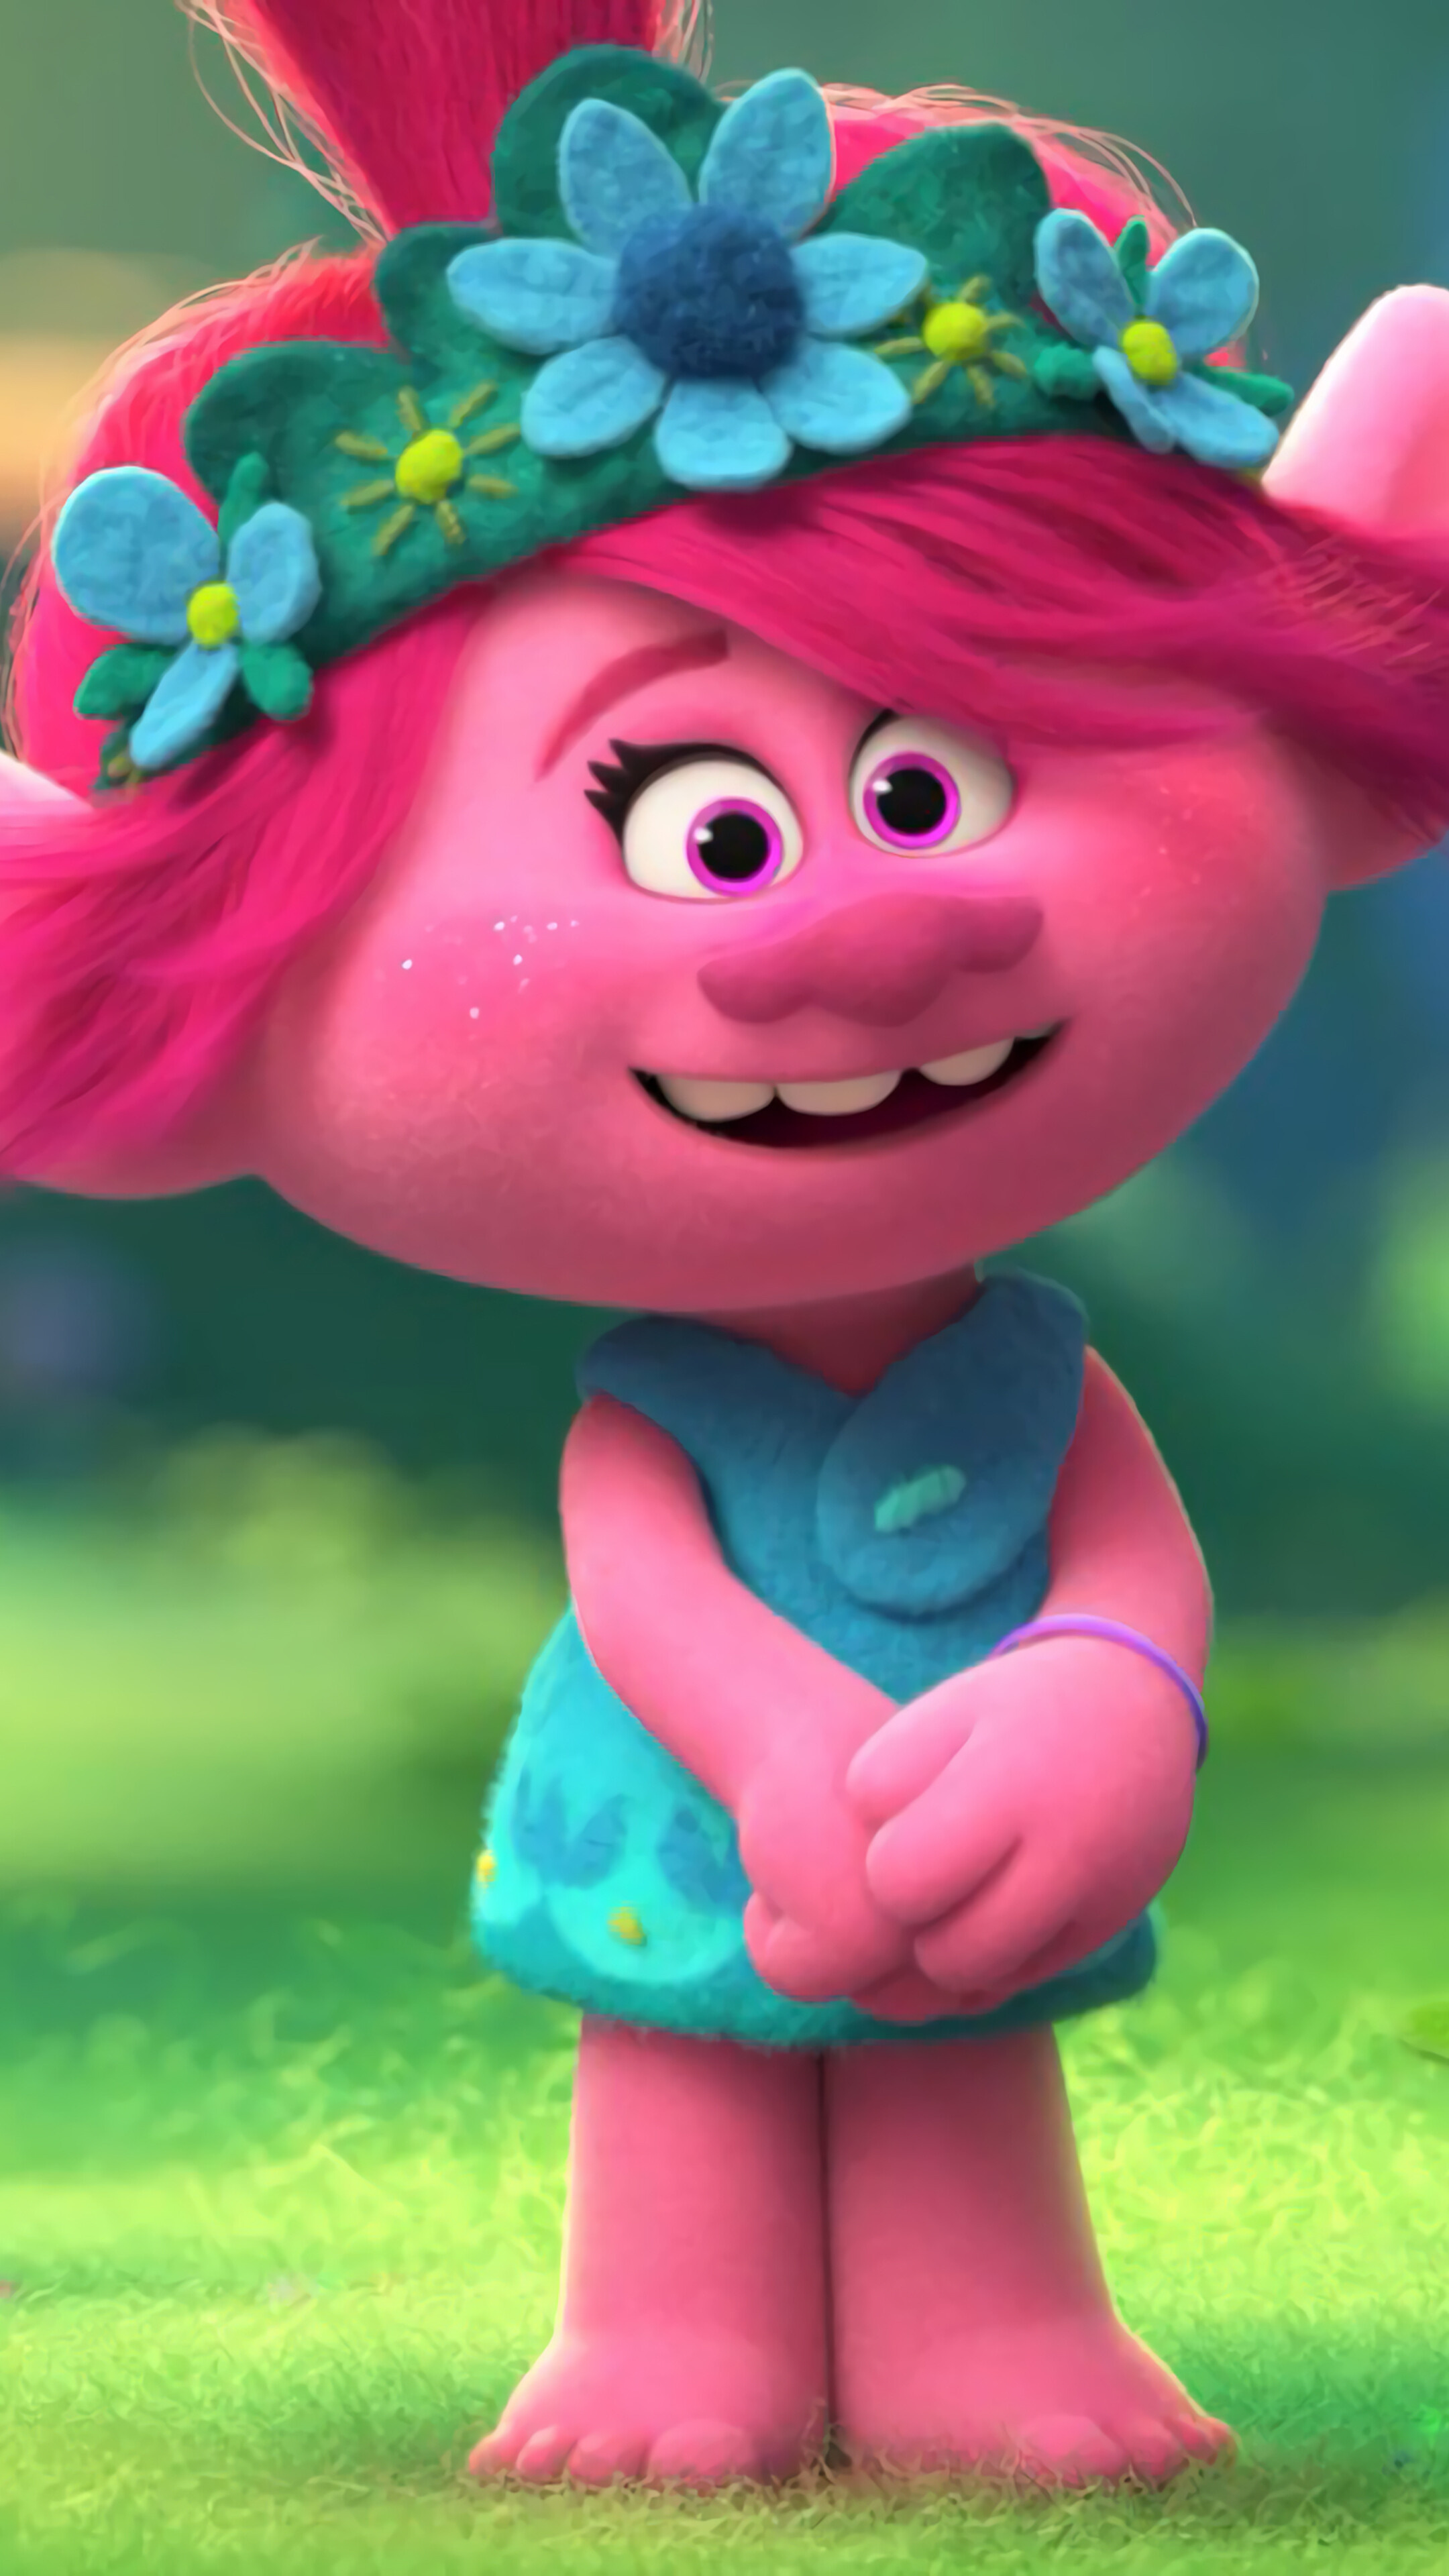 DreamWorks: American animation studio that produces animated films, Trolls. 2160x3840 4K Background.